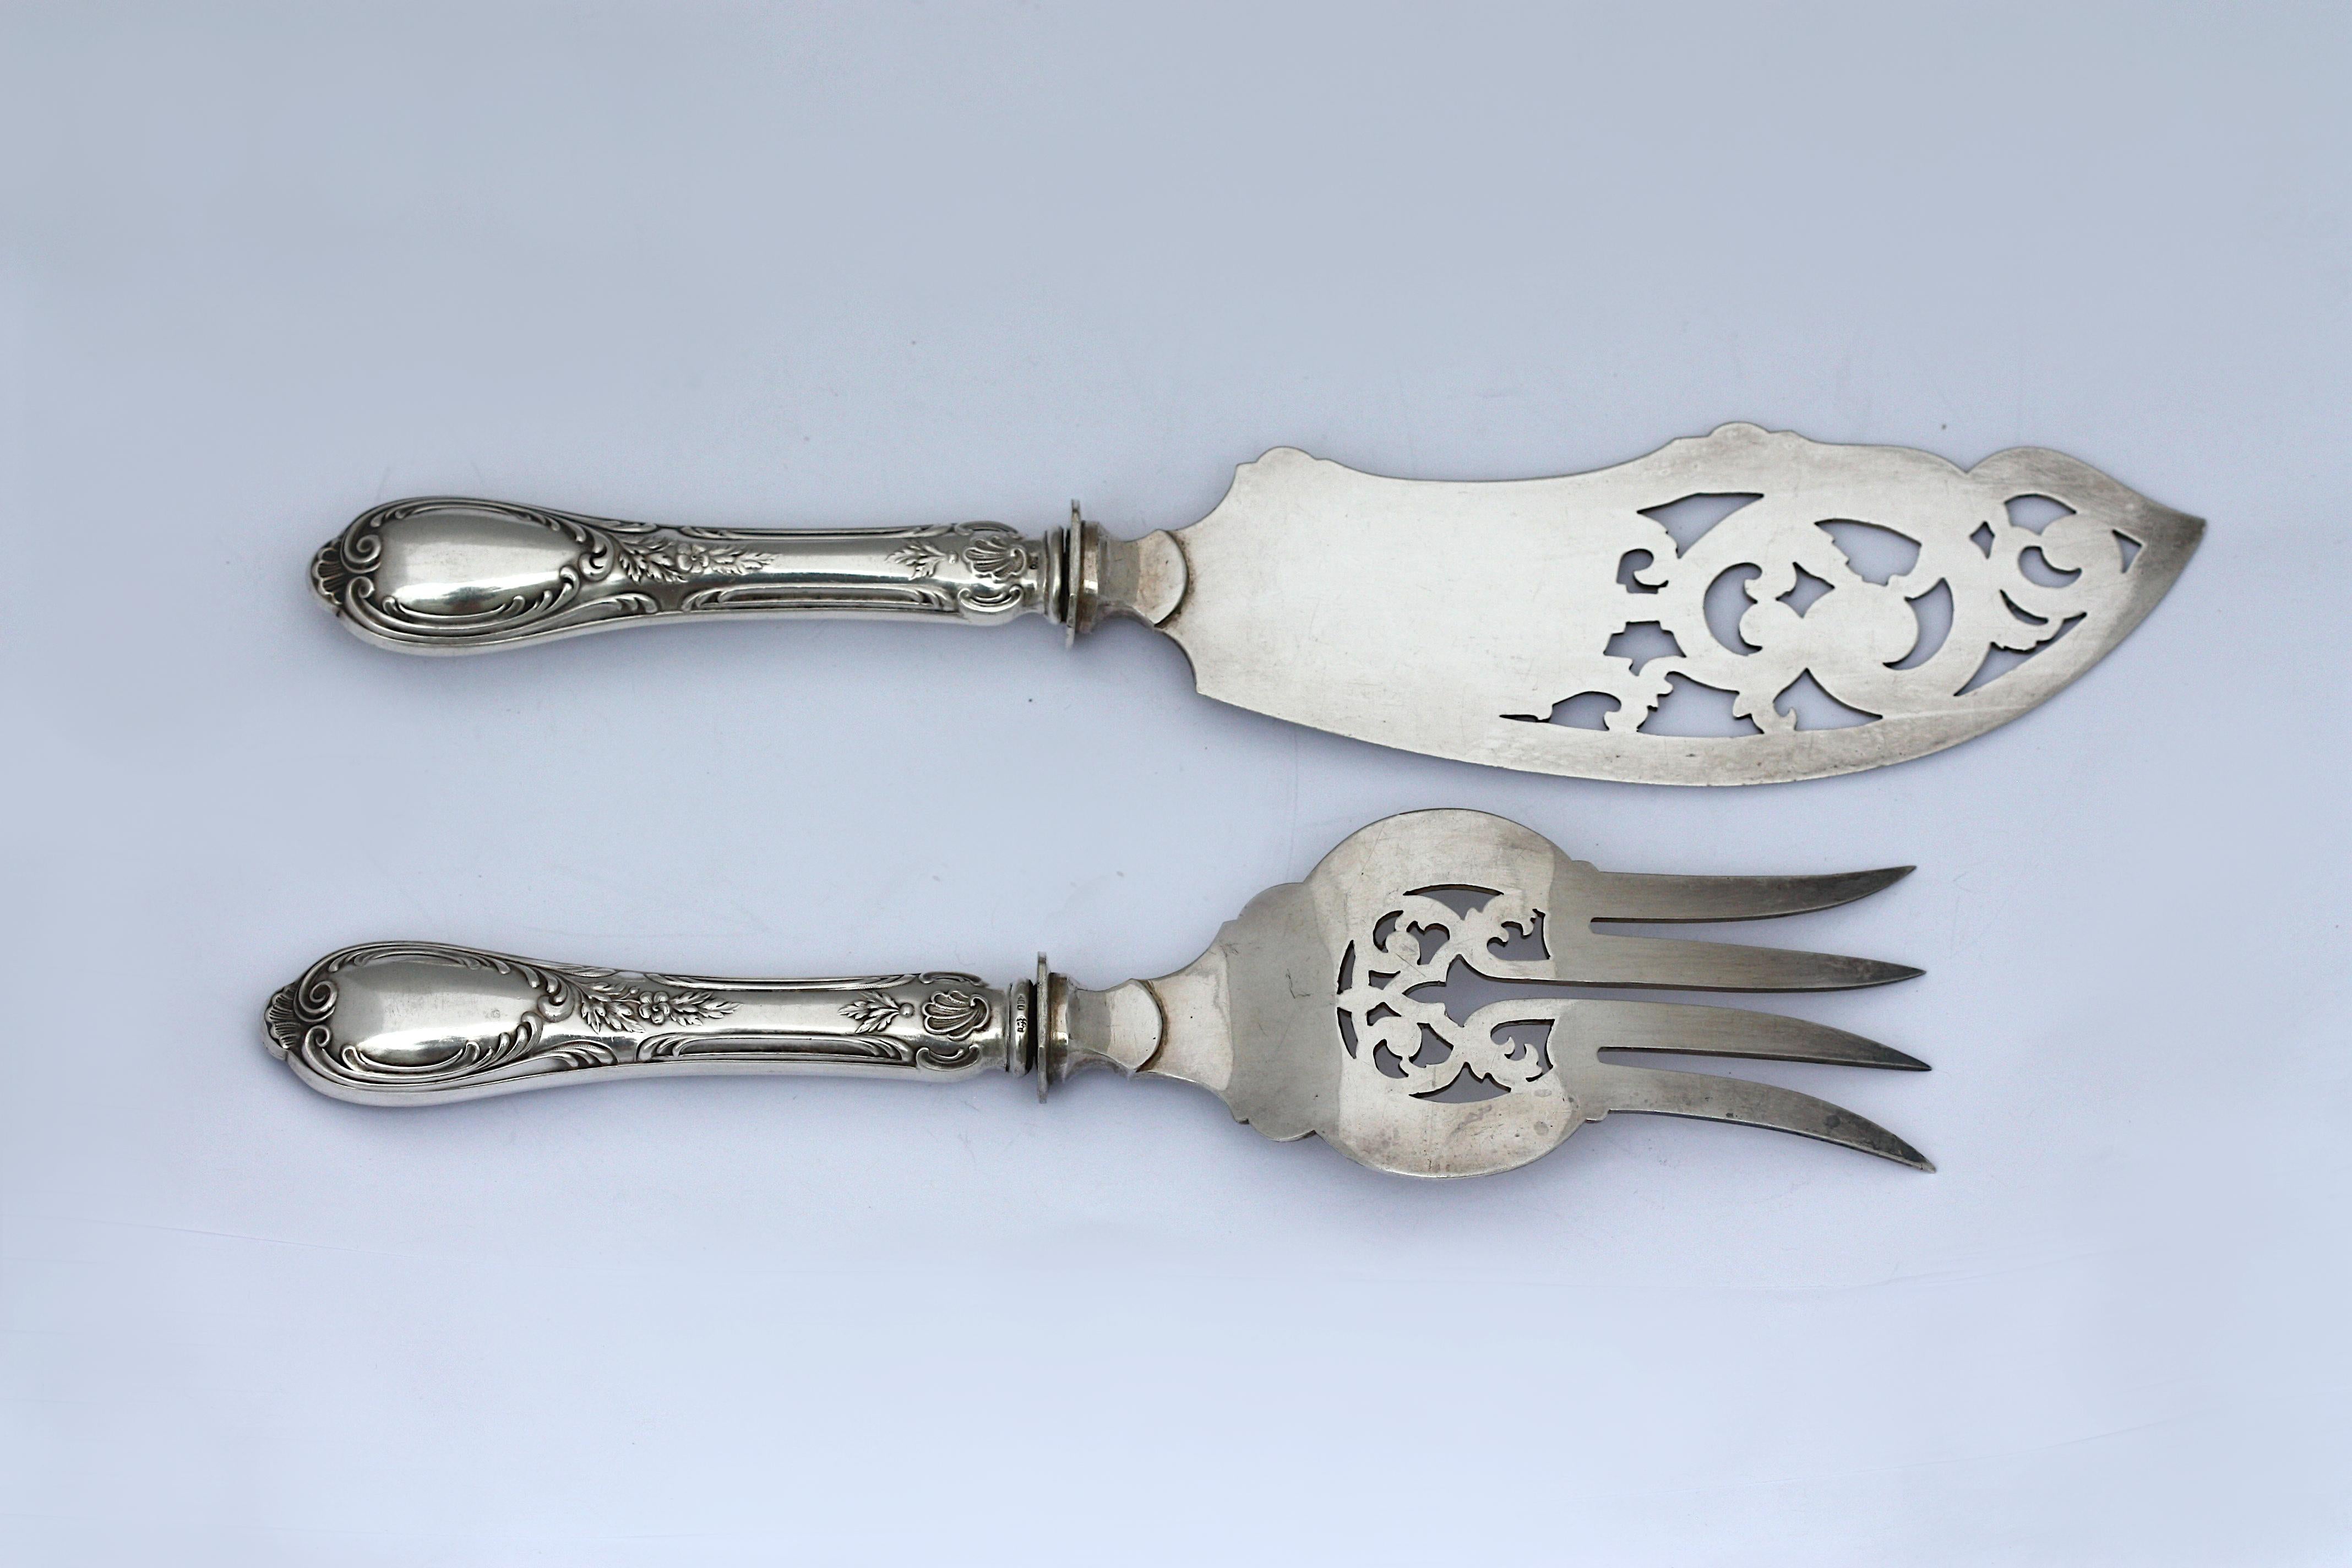 
Two Continental Silver Serving Pieces
Late 19th Century, marked 800 and with an indistinct additional mark. Comprising a fish slice, and a fish fork, chased with foliage and leaves.
Lengths 11 in. (27.94 cm.), 9.5 in. (24.13 cm.)